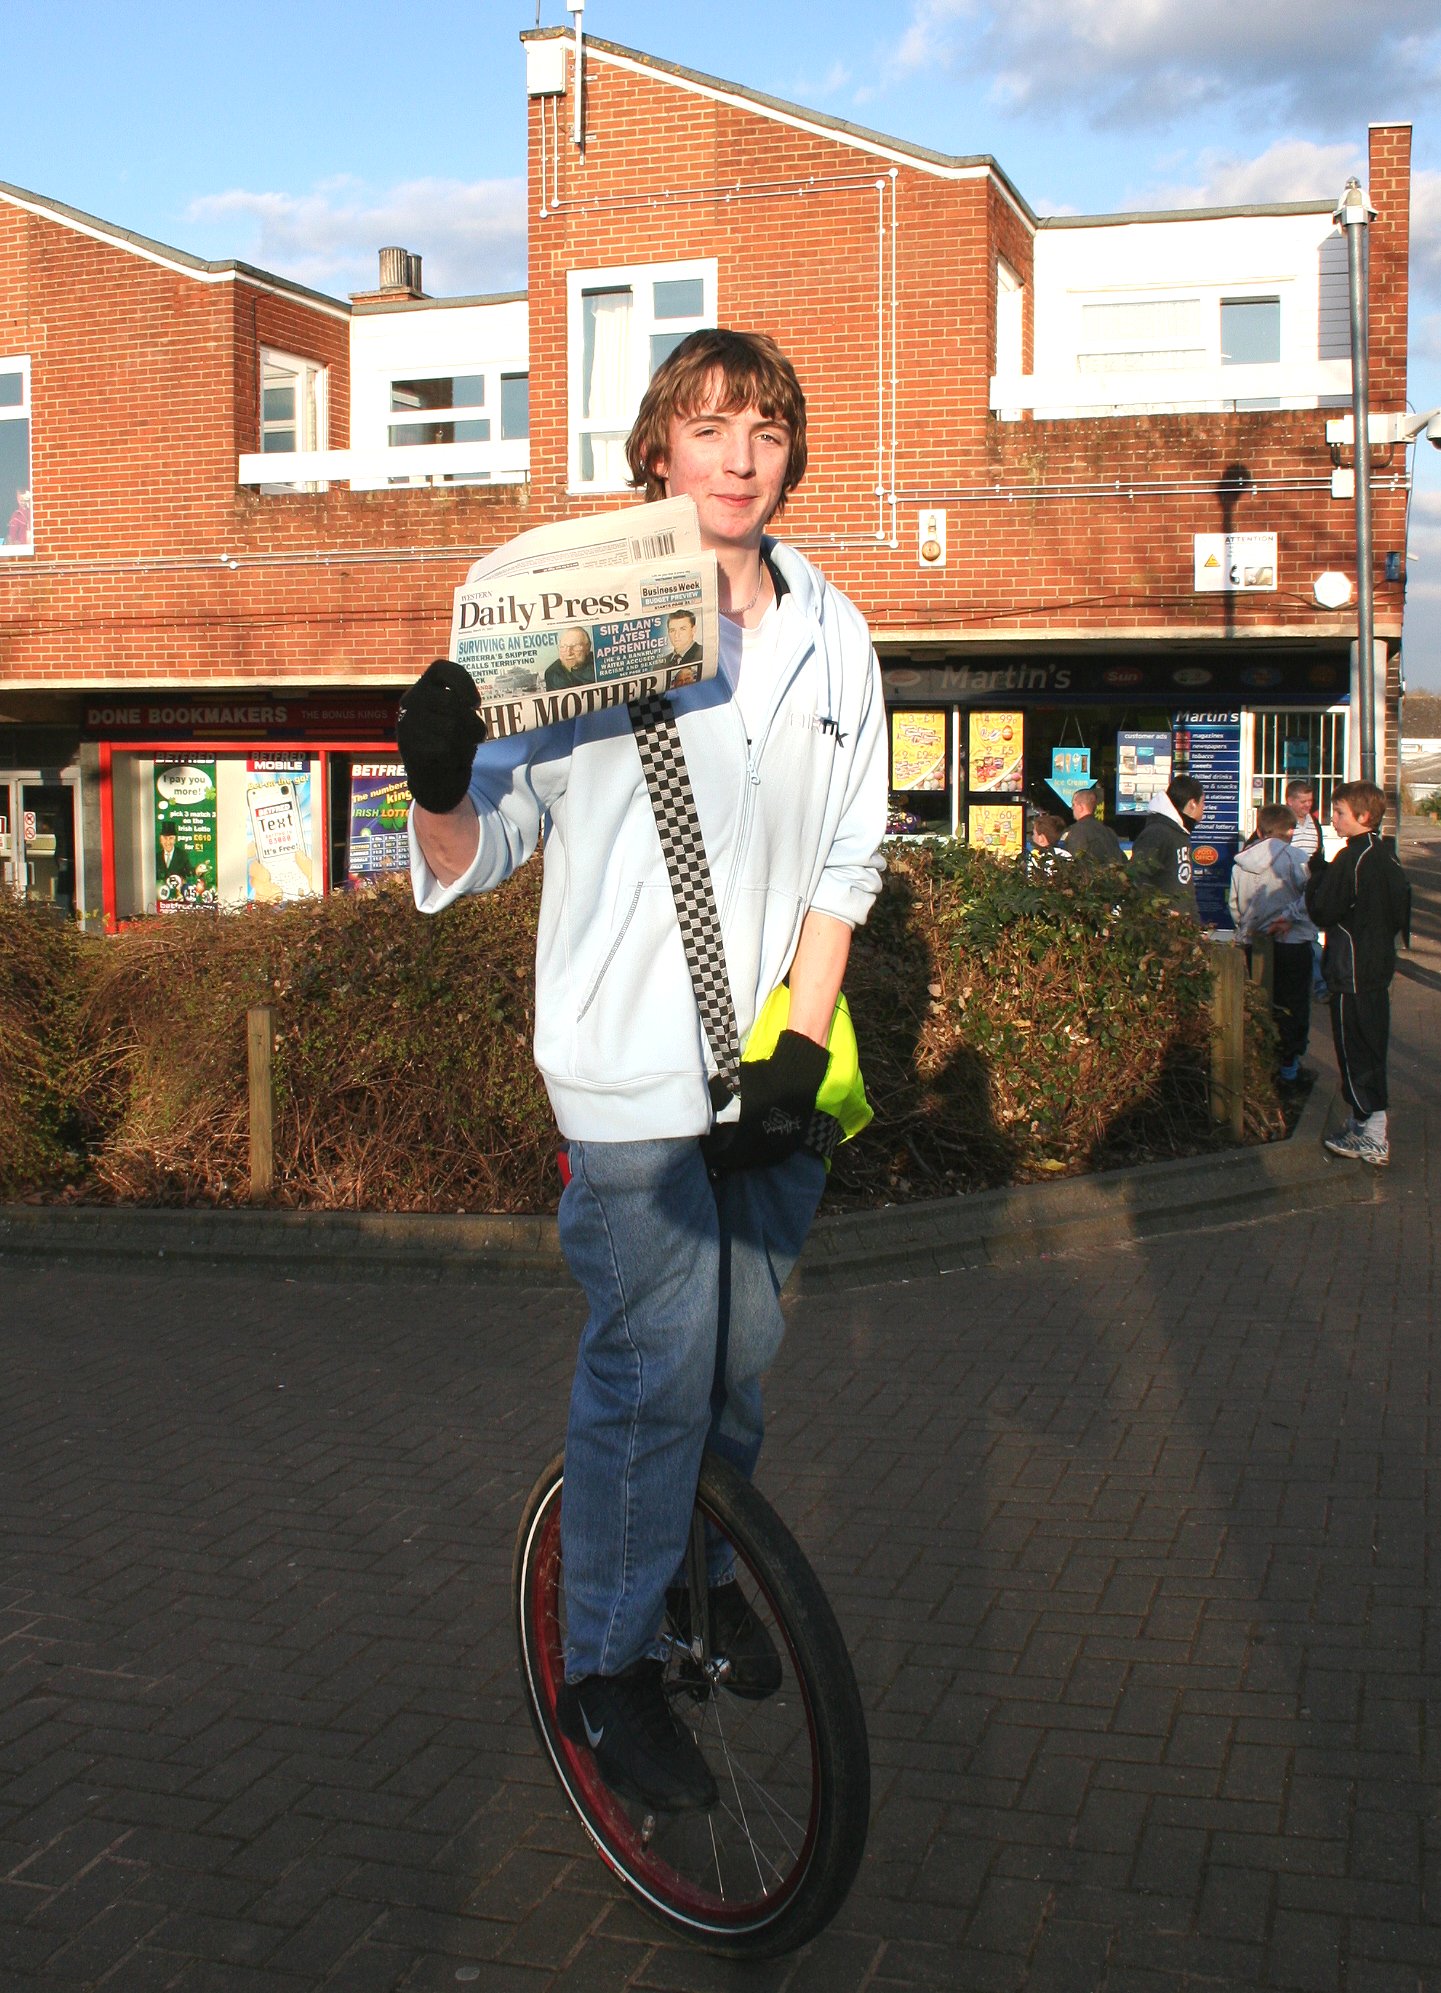 Delivery boy is uni-que in Swindon